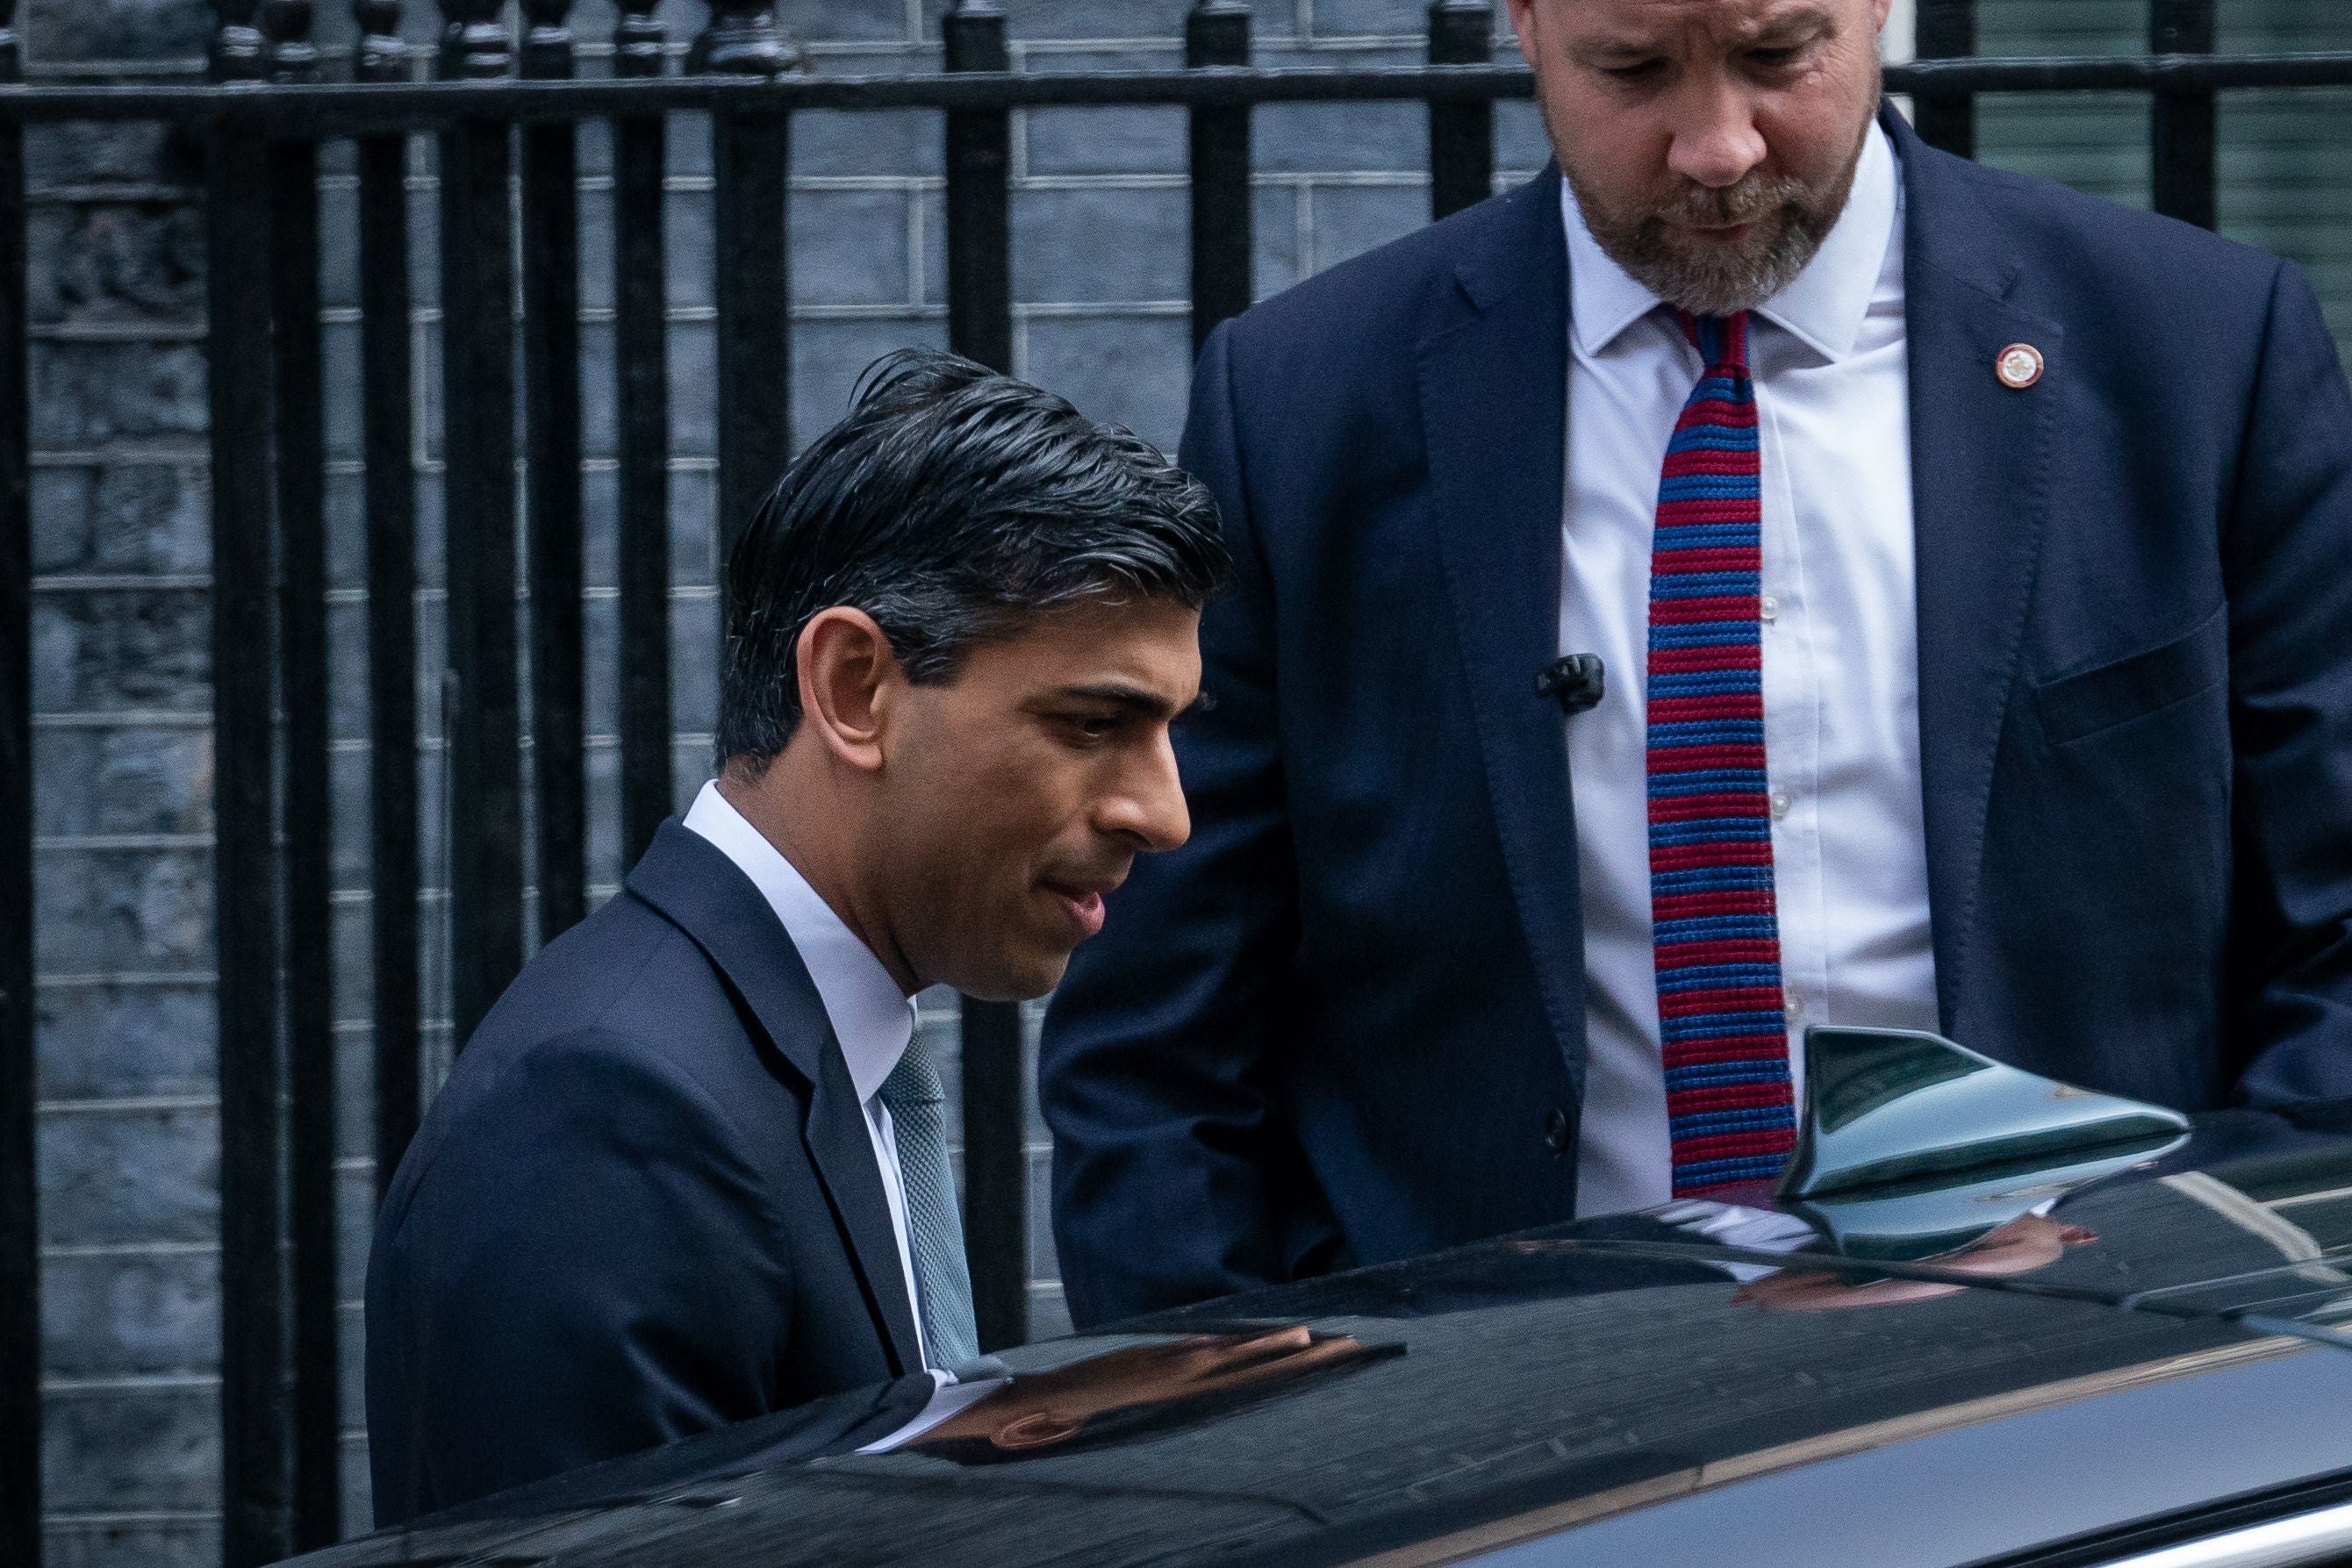 Since the spring statement, Rishi Sunak’s popularity has taken a massive 24-point hit